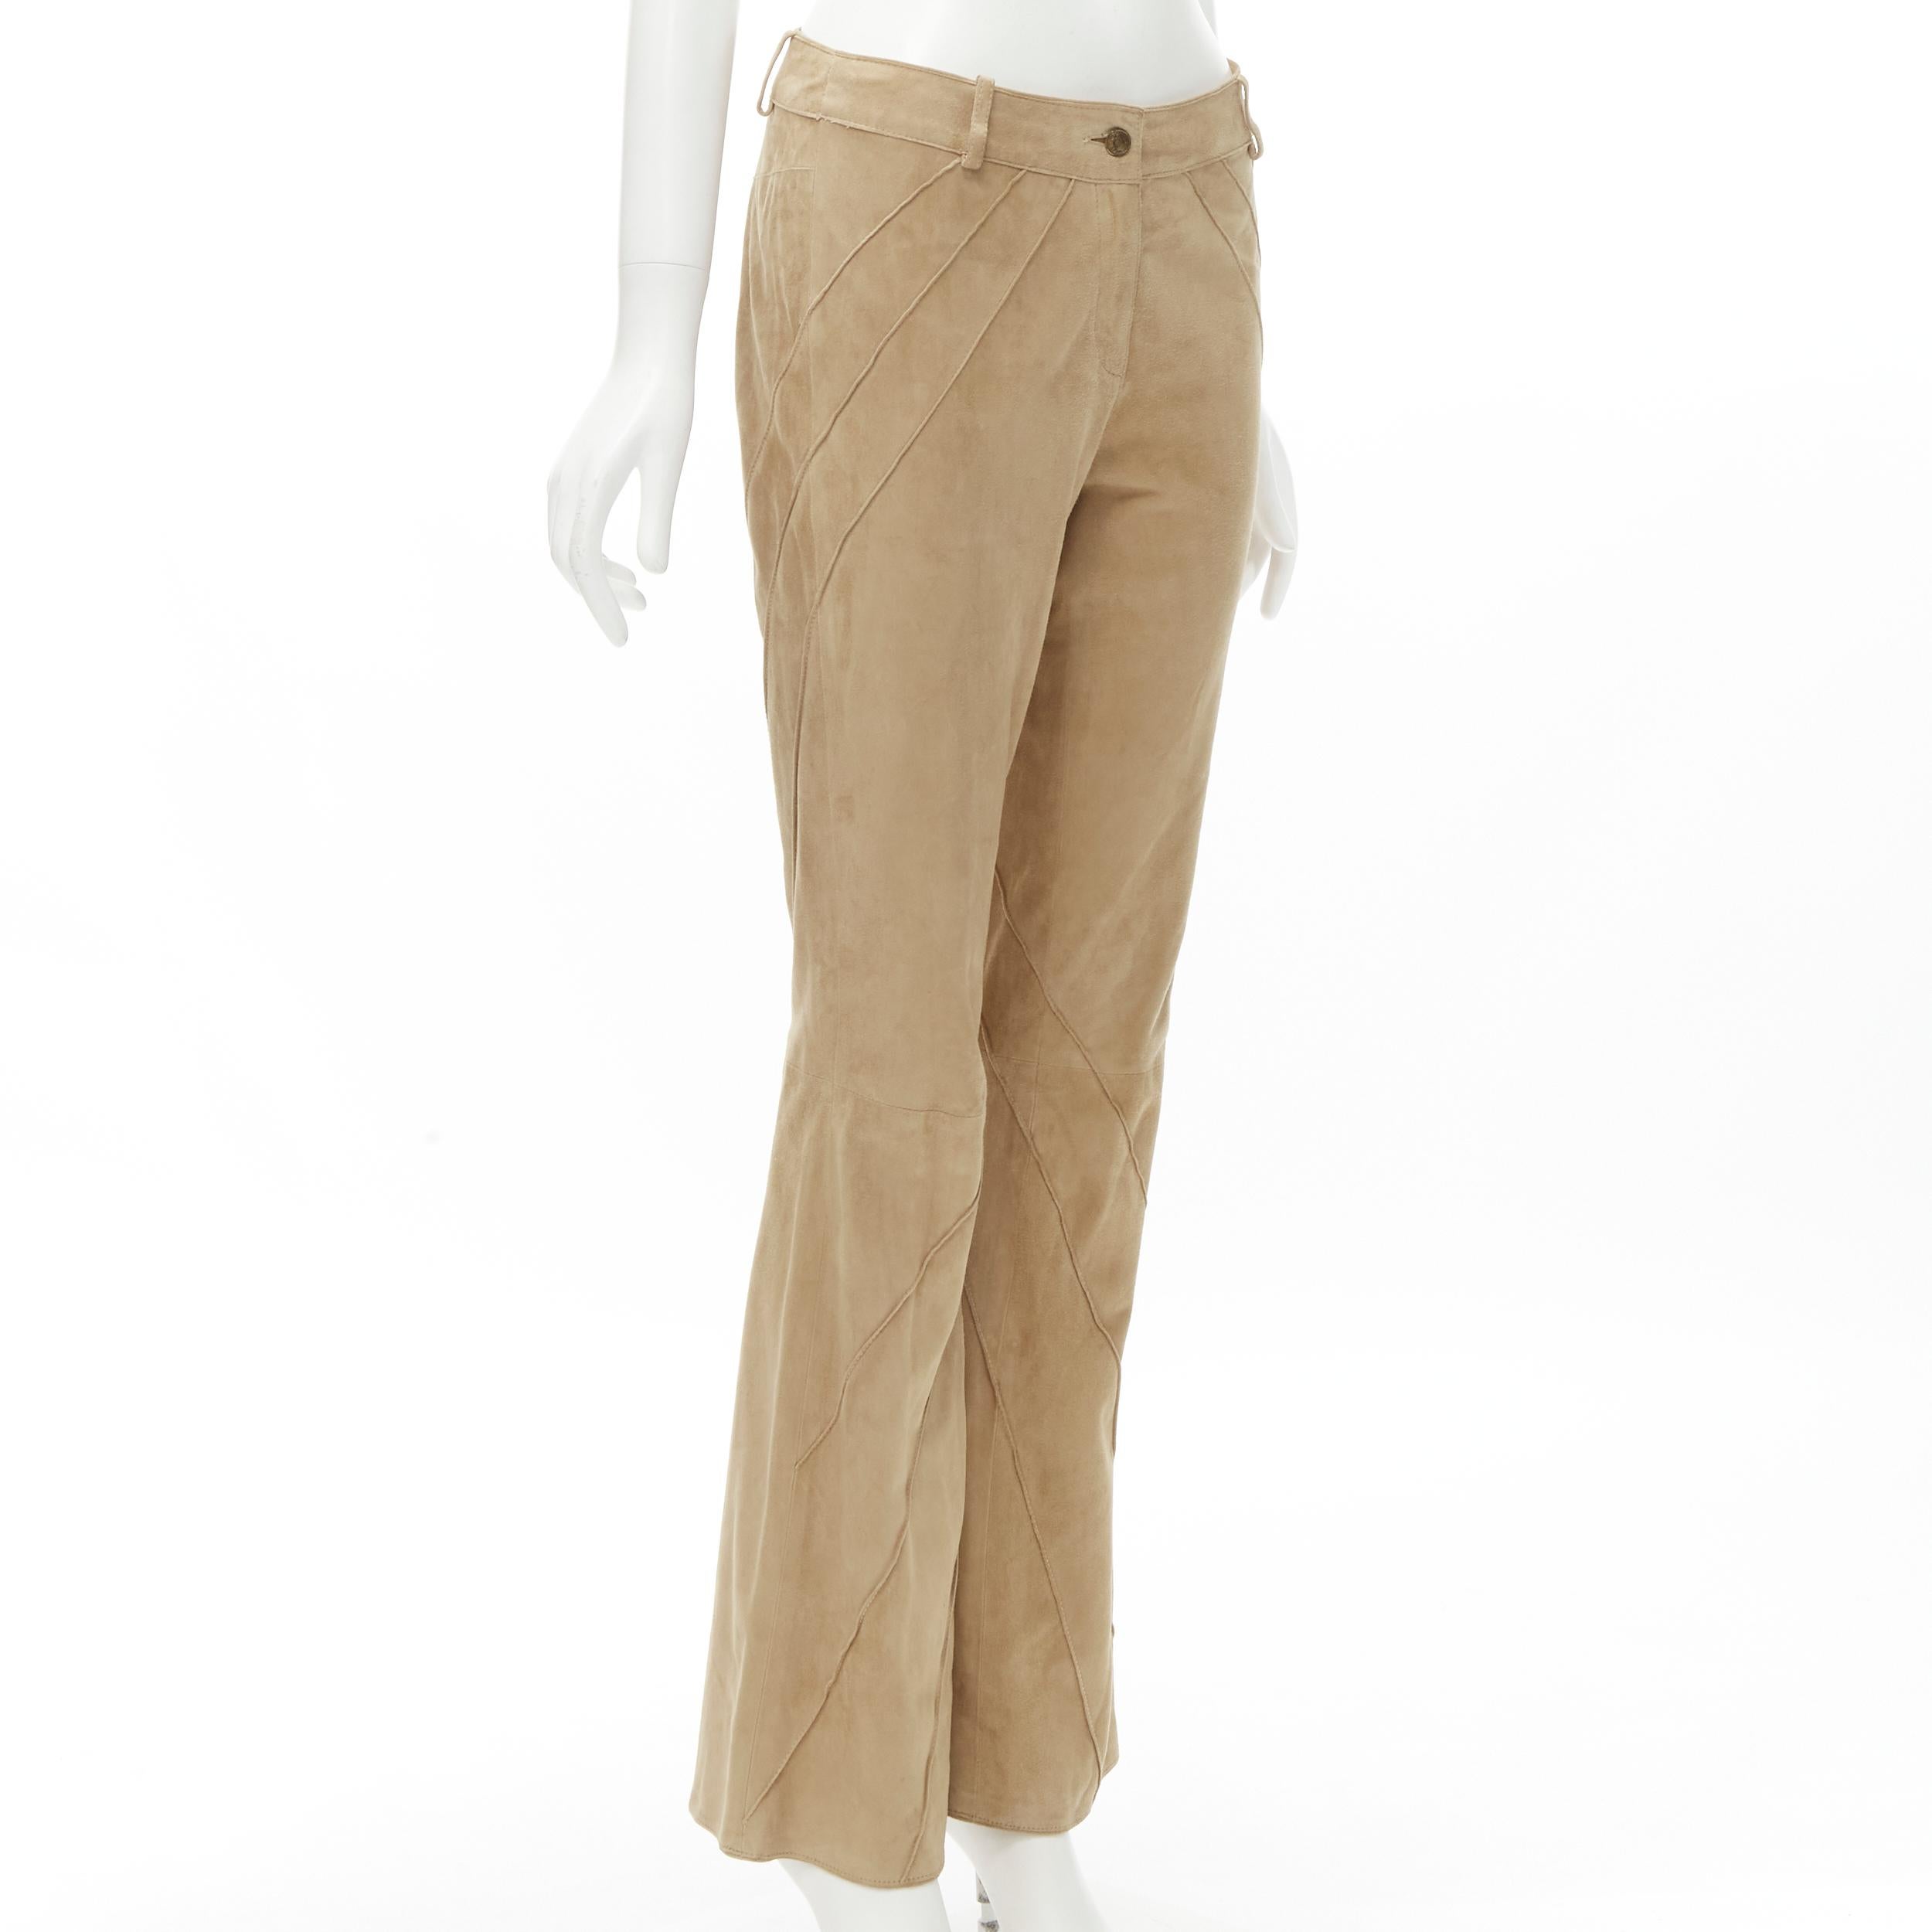 Brown CHRISTIAN DIOR Galliano Vintage brown suede spiral dart flared pants FR36 S